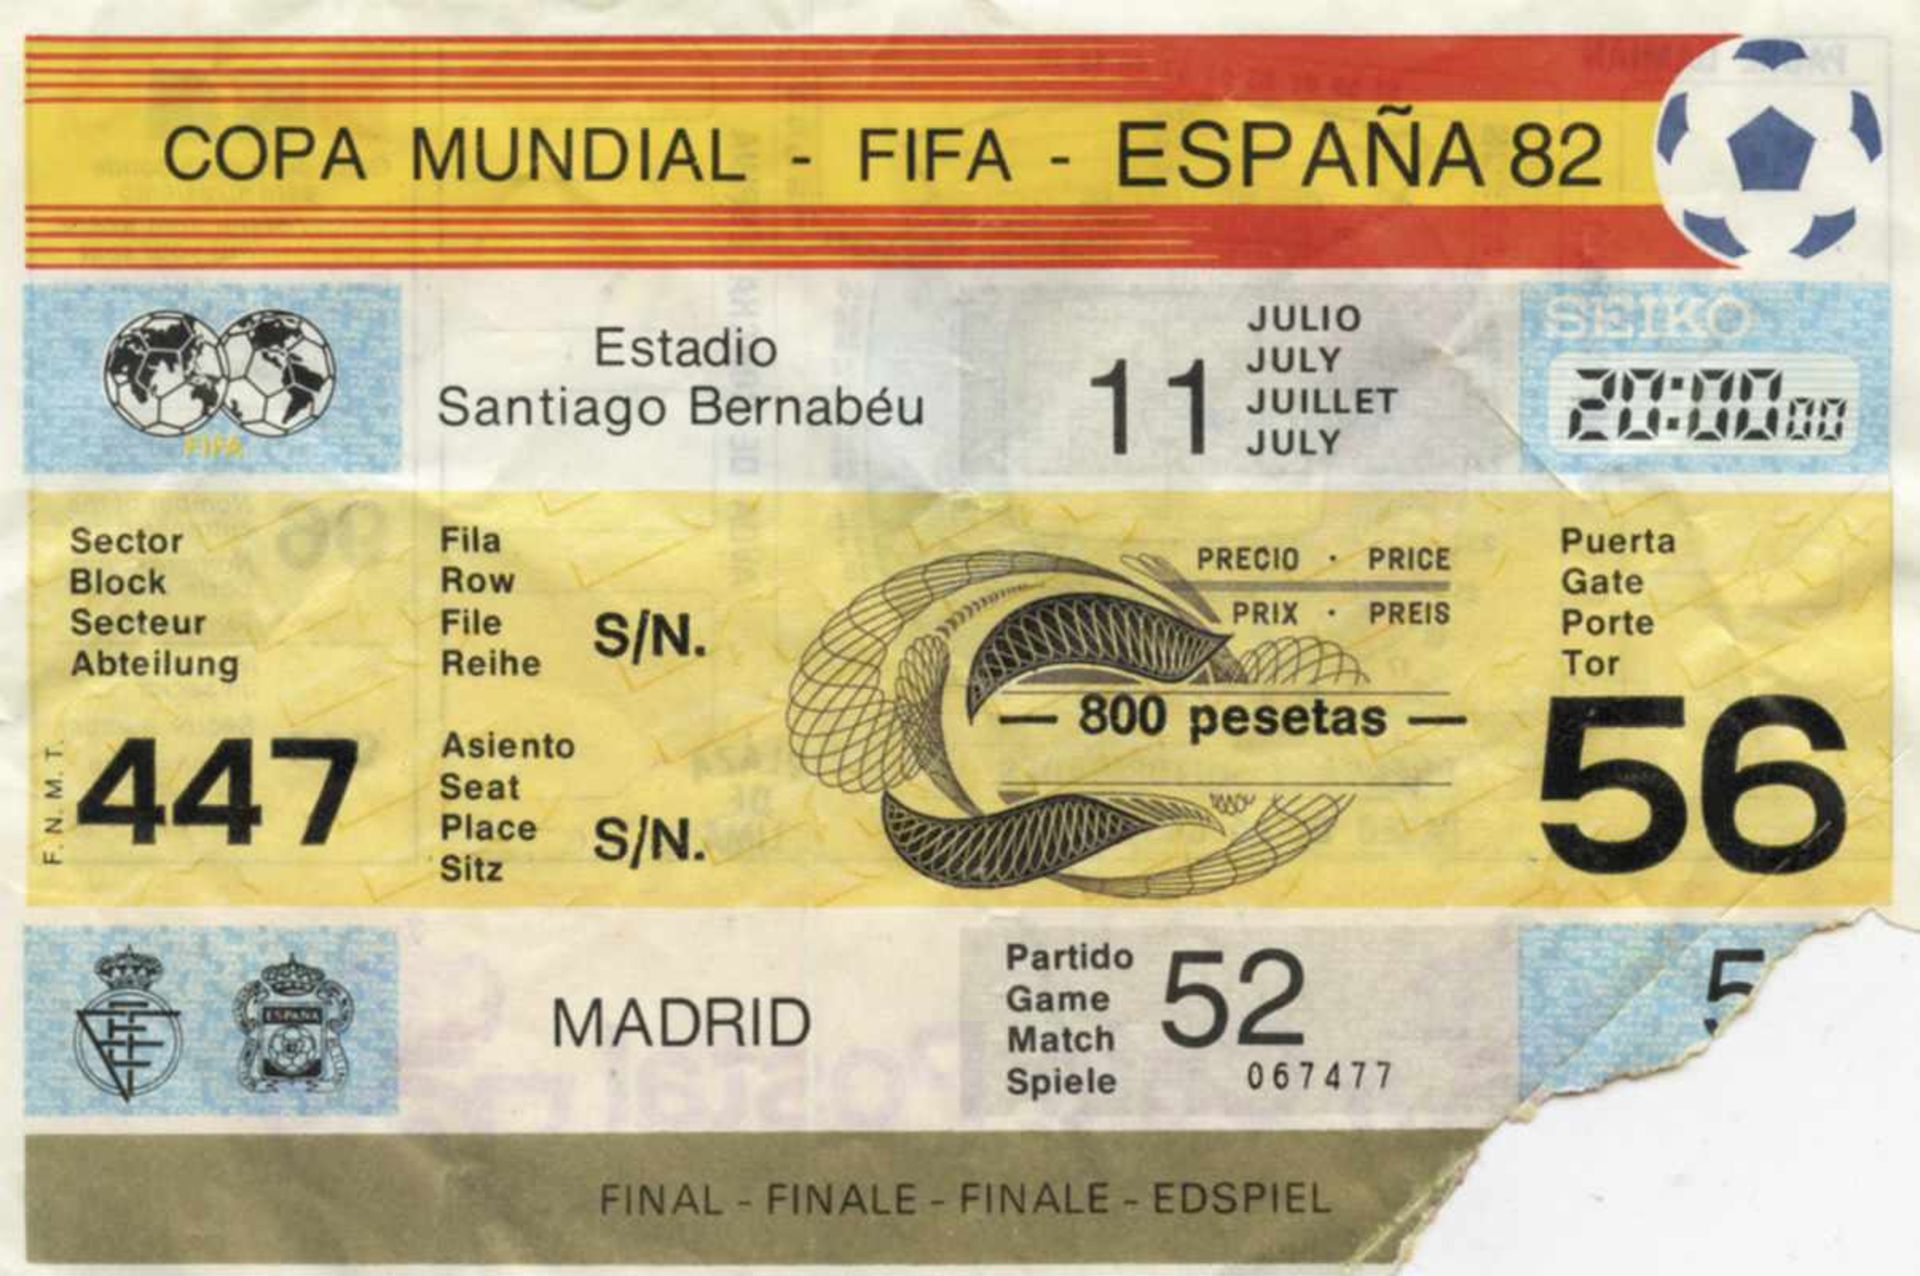 FIFA World Cup 1982 Ticket Final Italy vs Germany - (3-1), on 11th July, 1982 in Madrid. Size